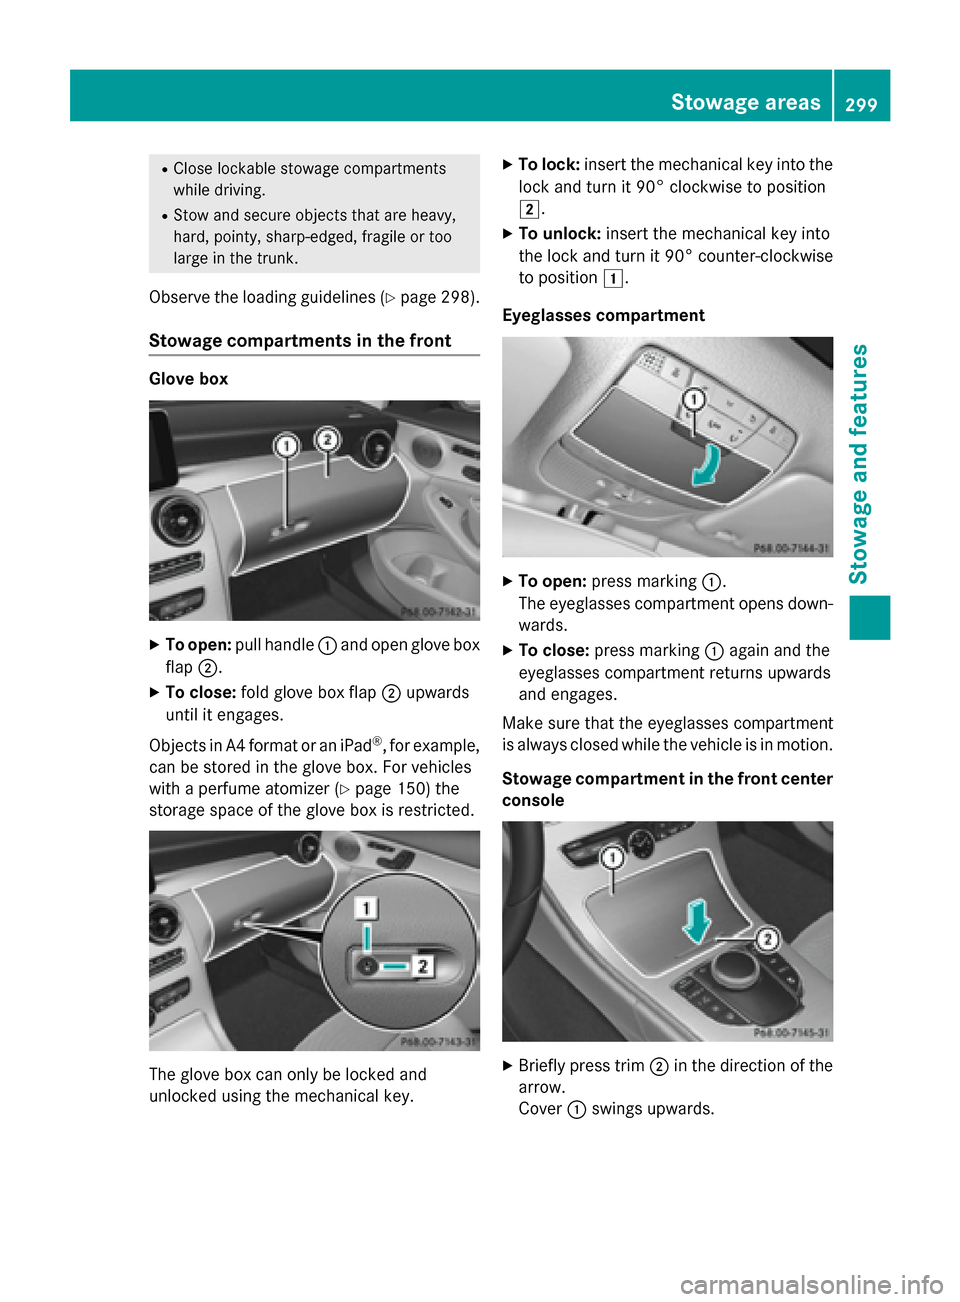 MERCEDES-BENZ C-Class SEDAN 2015 W205 Owners Manual R
Close lockable stowage compartments
while driving.
R Stow and secure objects that are heavy,
hard, pointy, sharp-edged, fragile or too
large in the trunk.
Observe the loading guidelines (Y page 298)